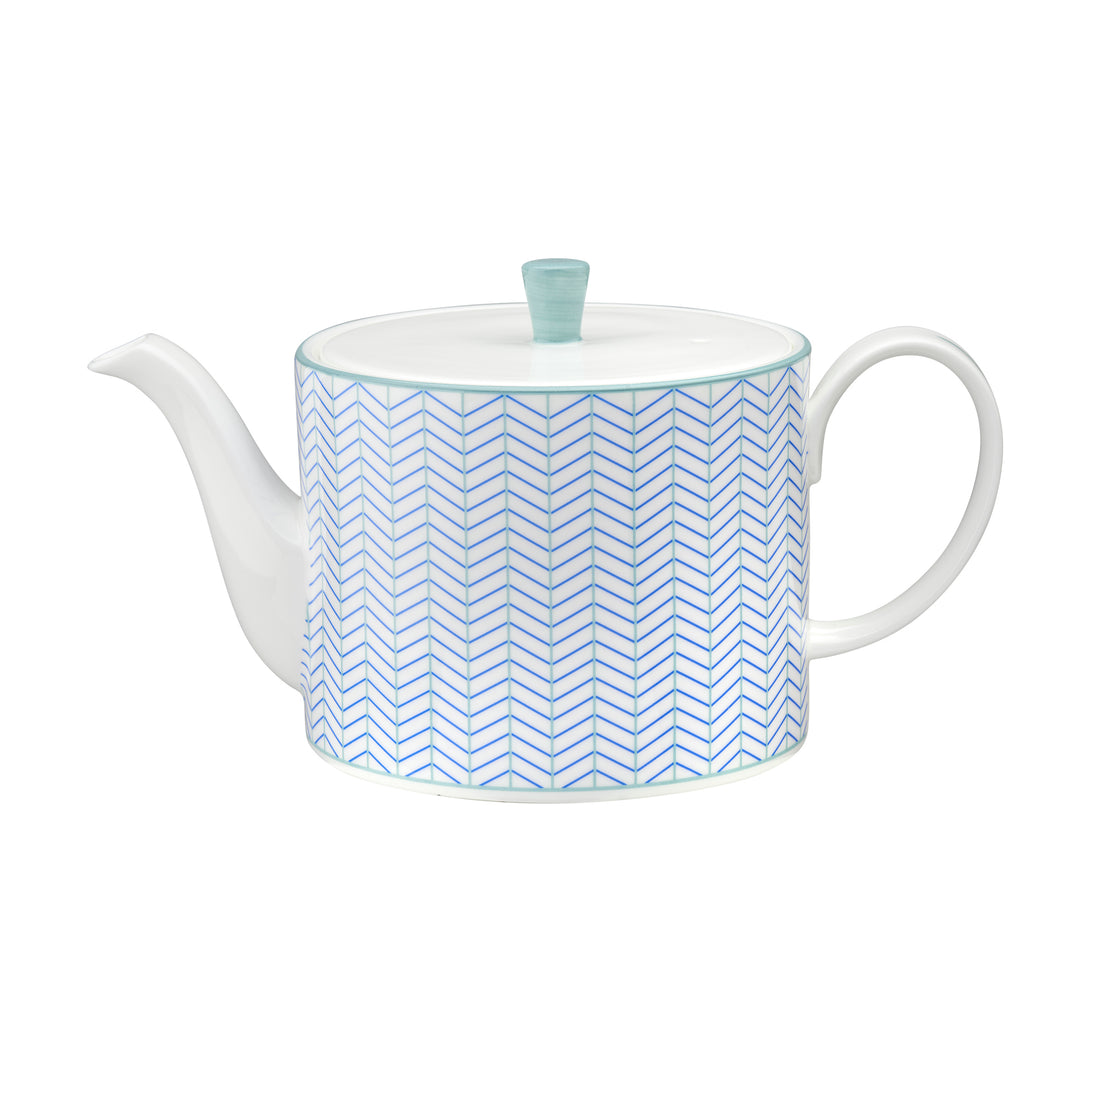 Ebb Teapot in Blue & Turquoise - 1L